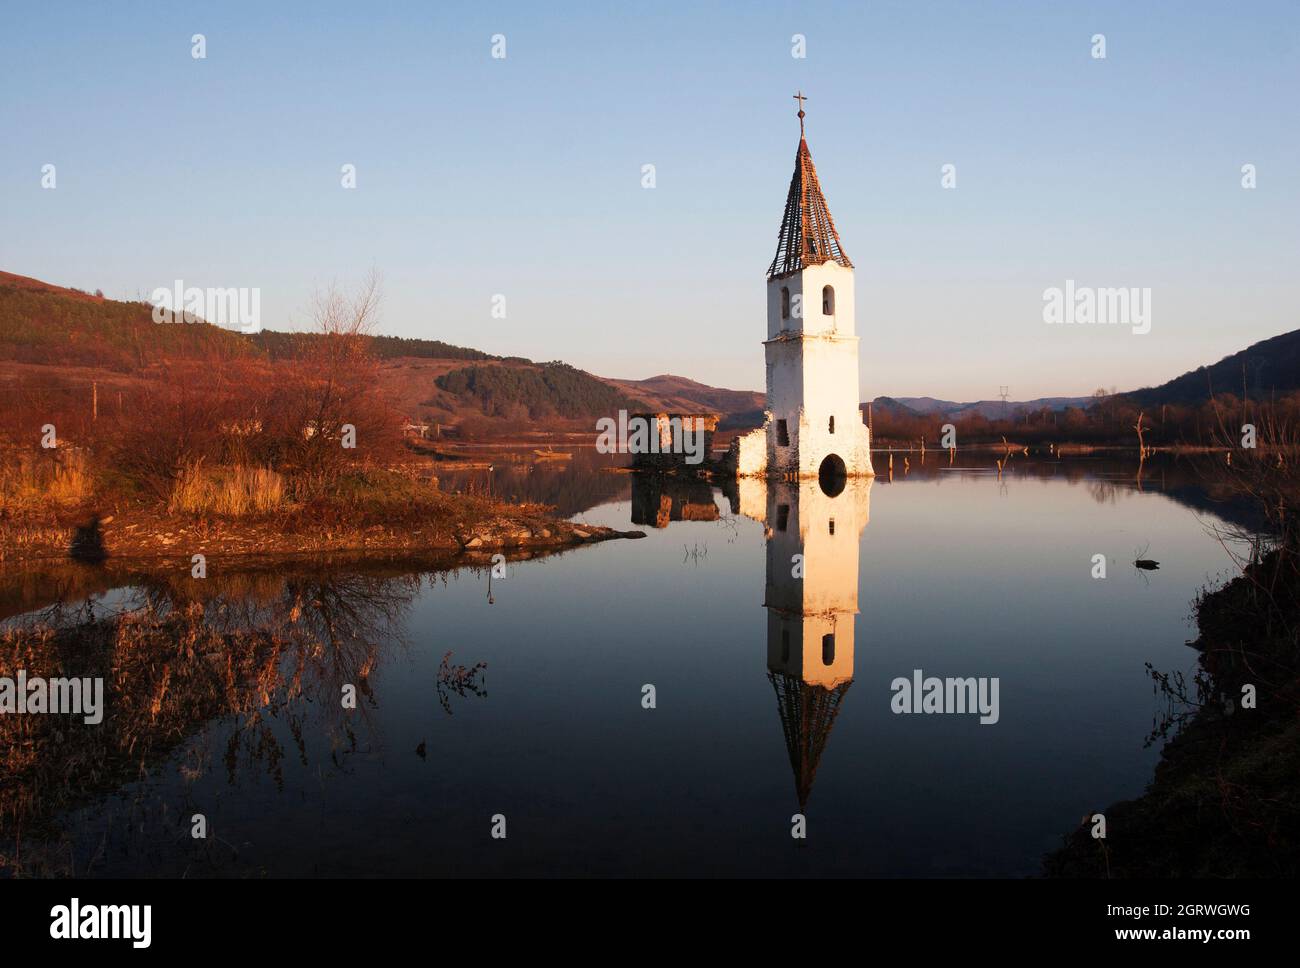 The ruins of a catholic church on the surface of Lake Bezid, the artificial dam that flooded the town. The church collapsed in 2014. Stock Photo